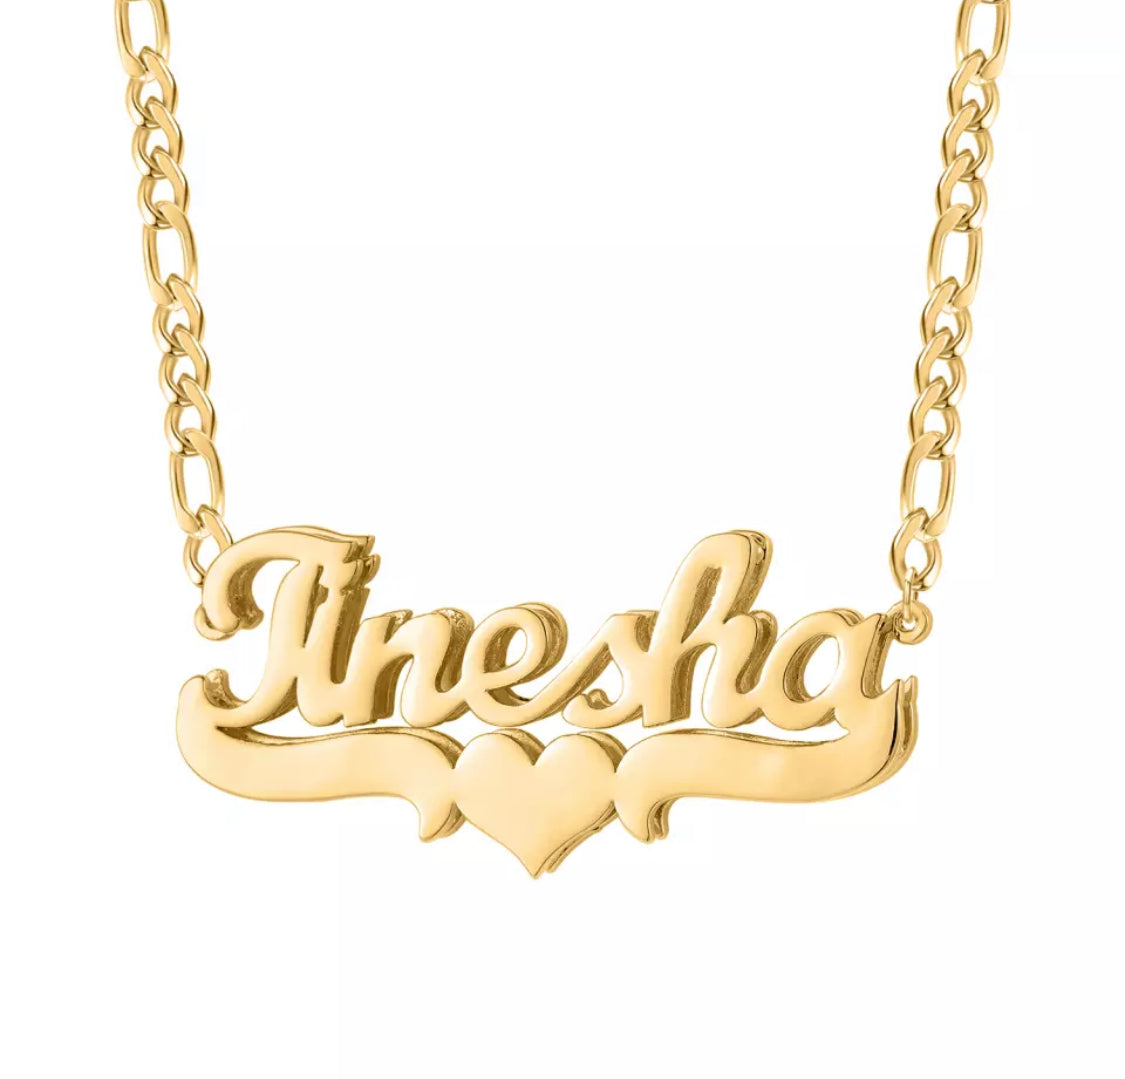 The Miller necklace